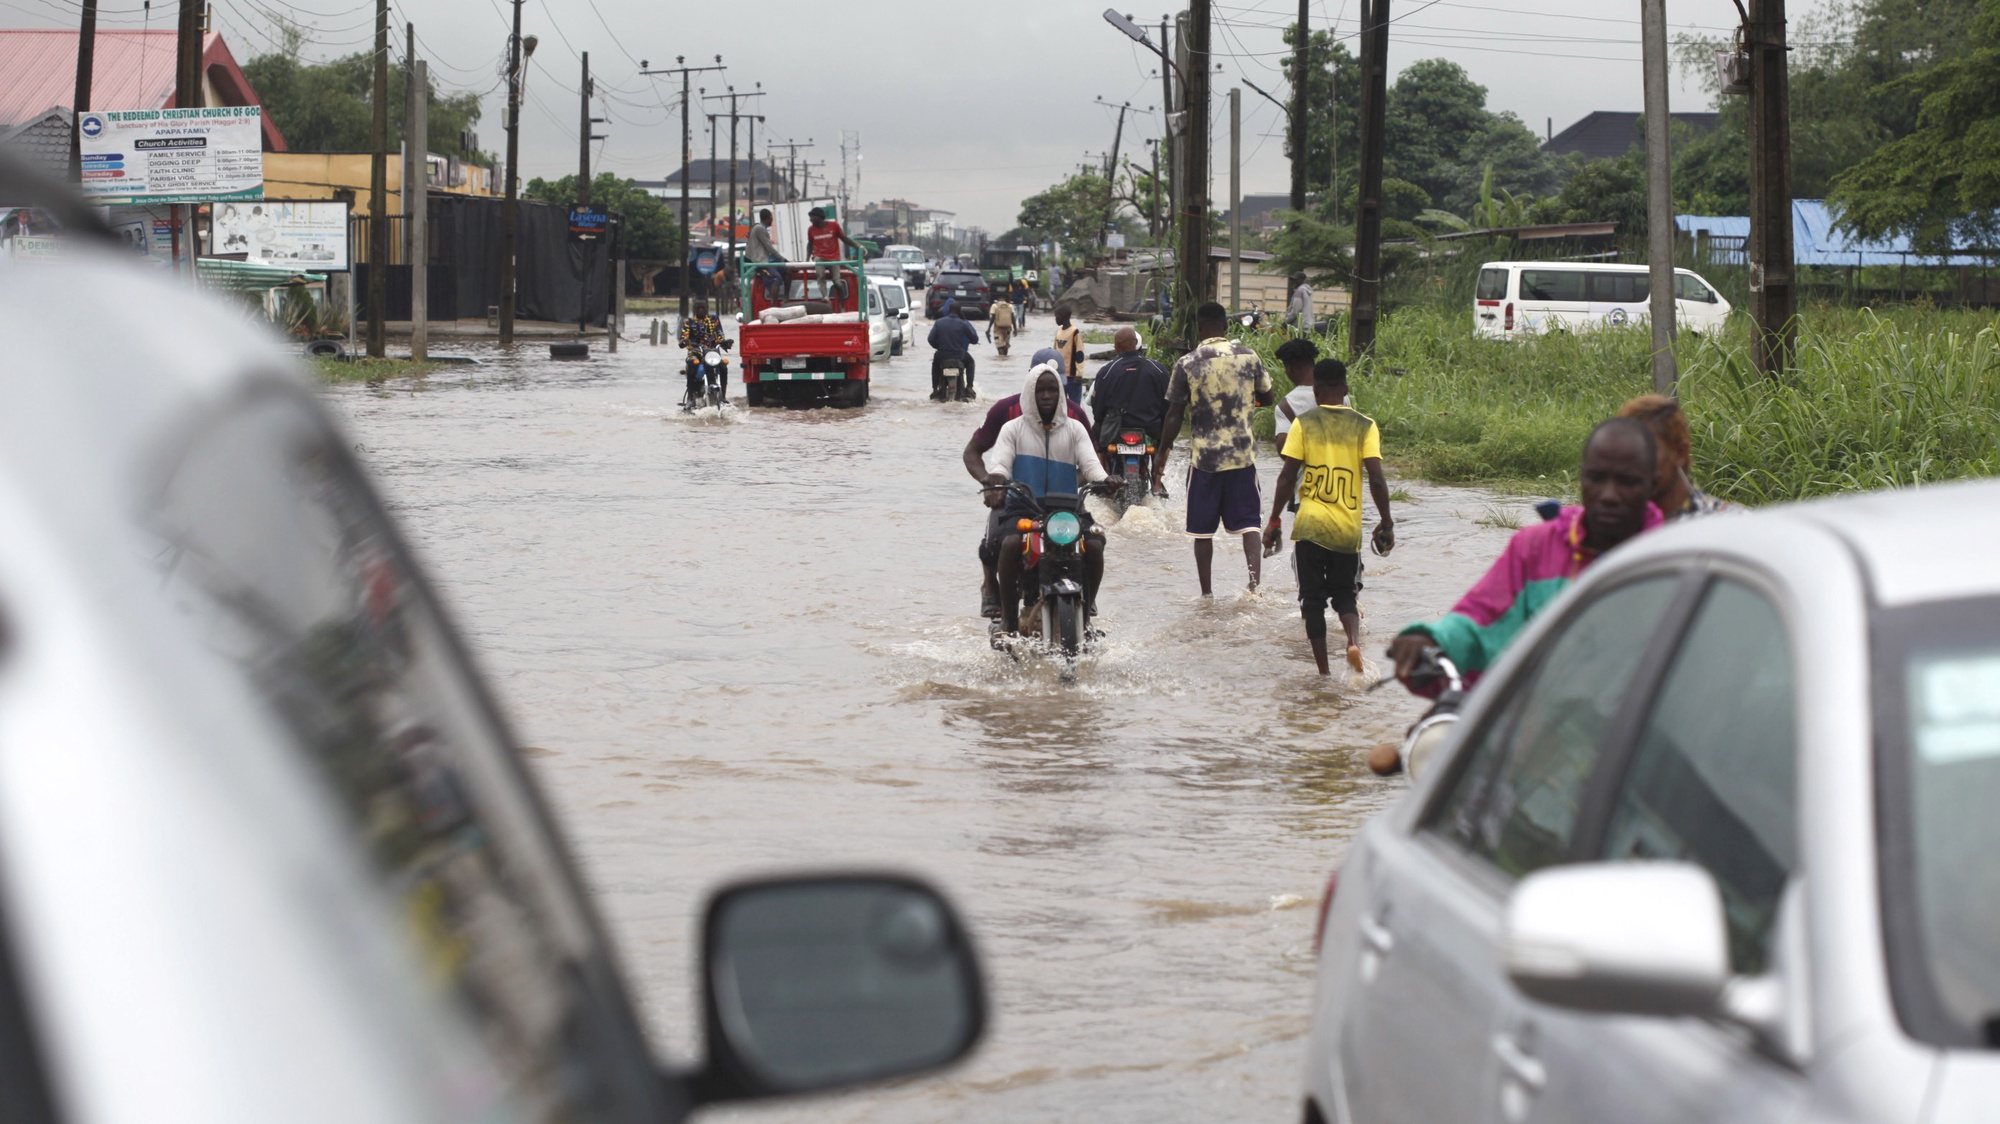 epa10180163 People wade through a flooded road after a rainfall in Lagos, Nigeria 12 September 2022. Flooding is a common phenomenon in Lagos with the impact on road and street trading.  EPA/Akintunde Akinleye